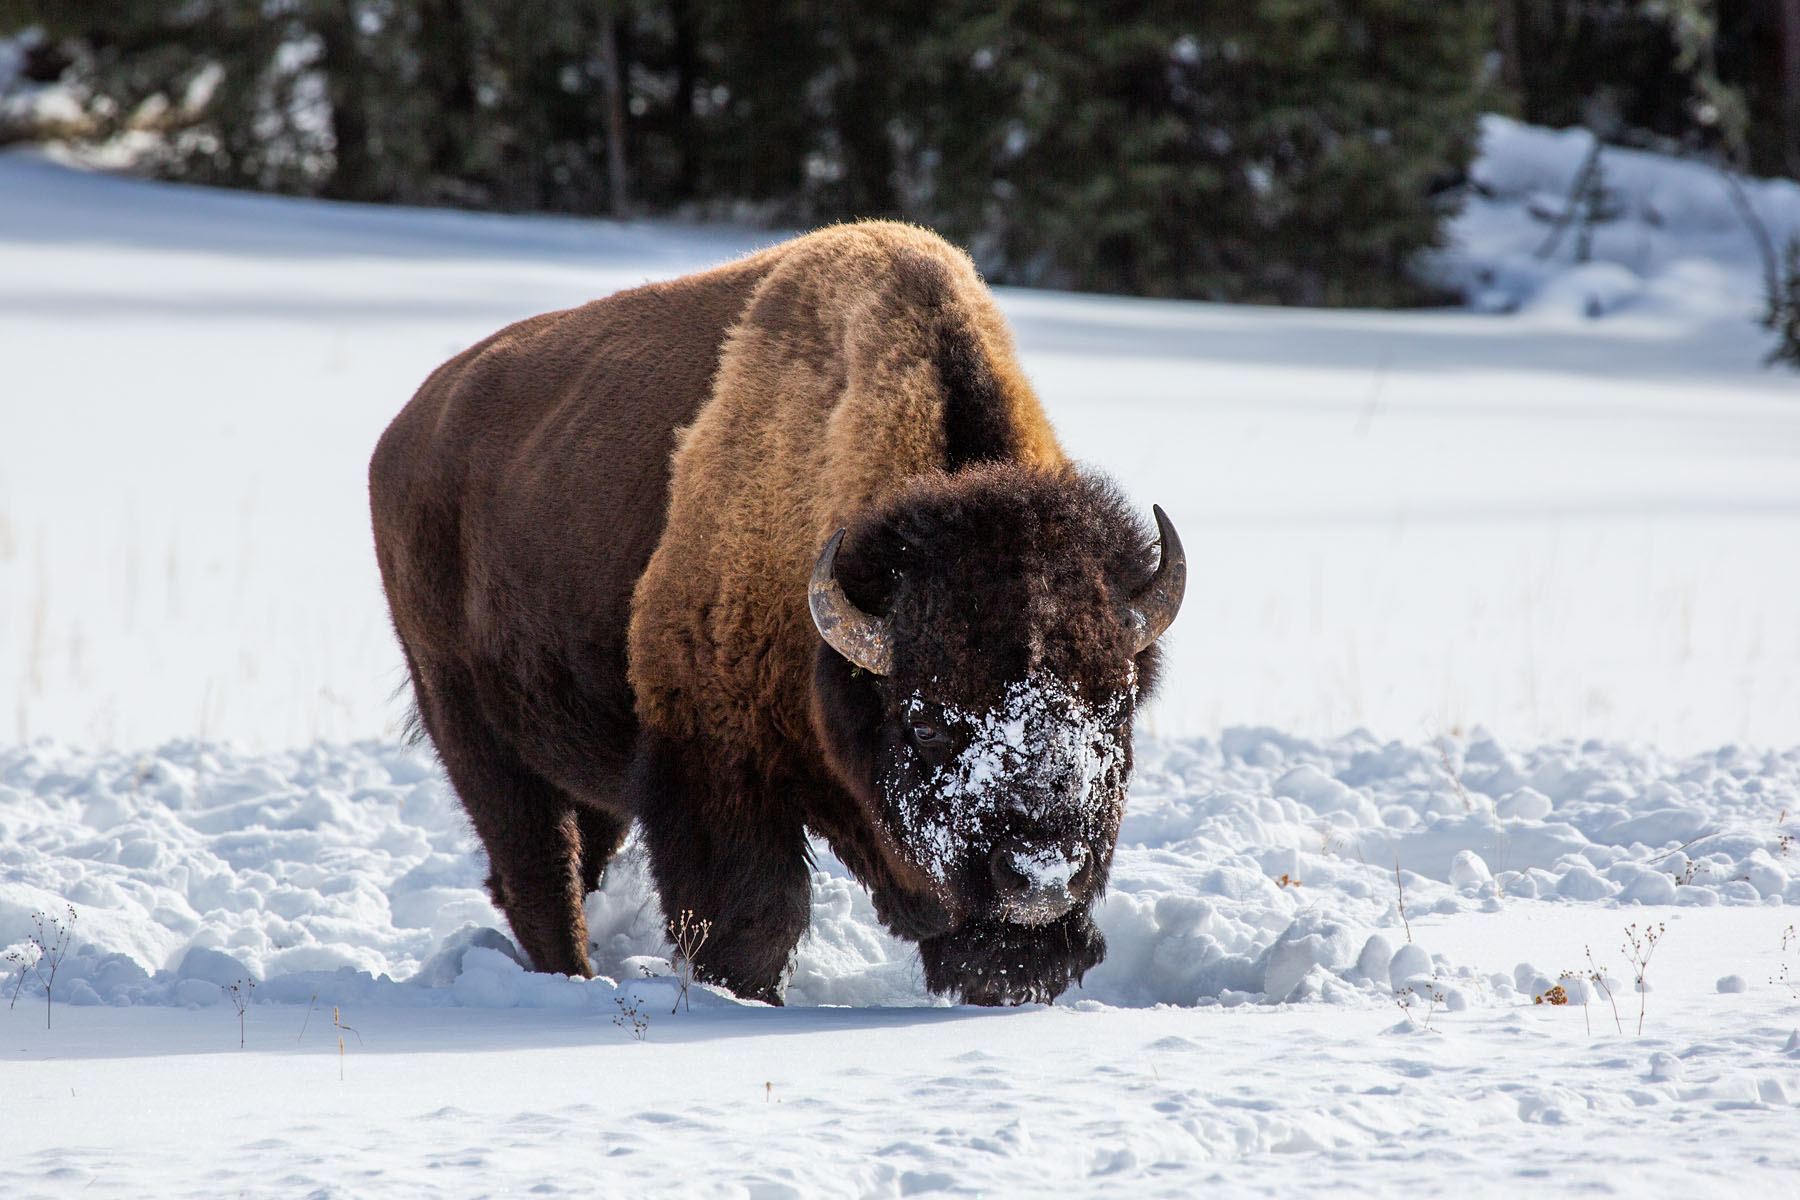 Bison, Yellowstone, February 2022.  Click for next photo.